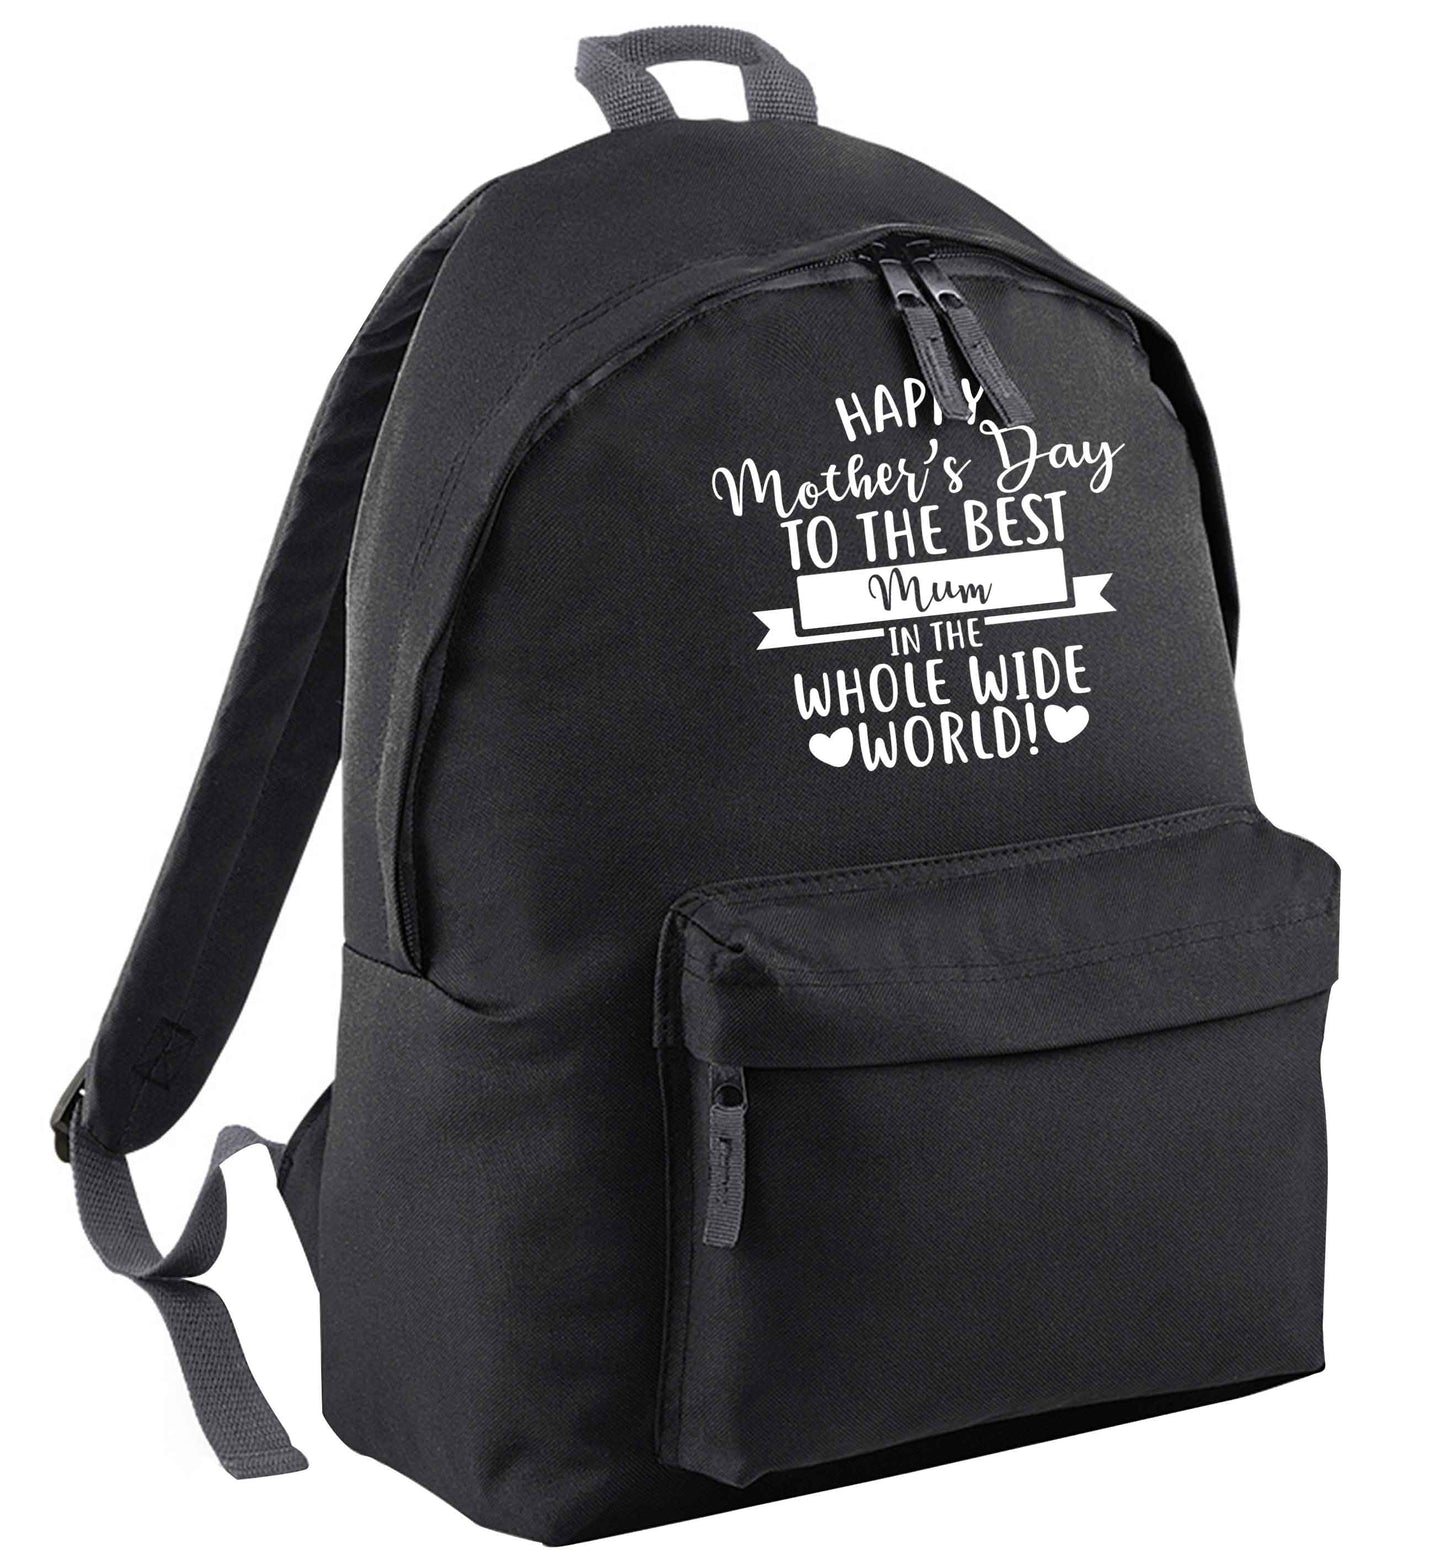 Happy mother's day to the best mum in the world | Adults backpack